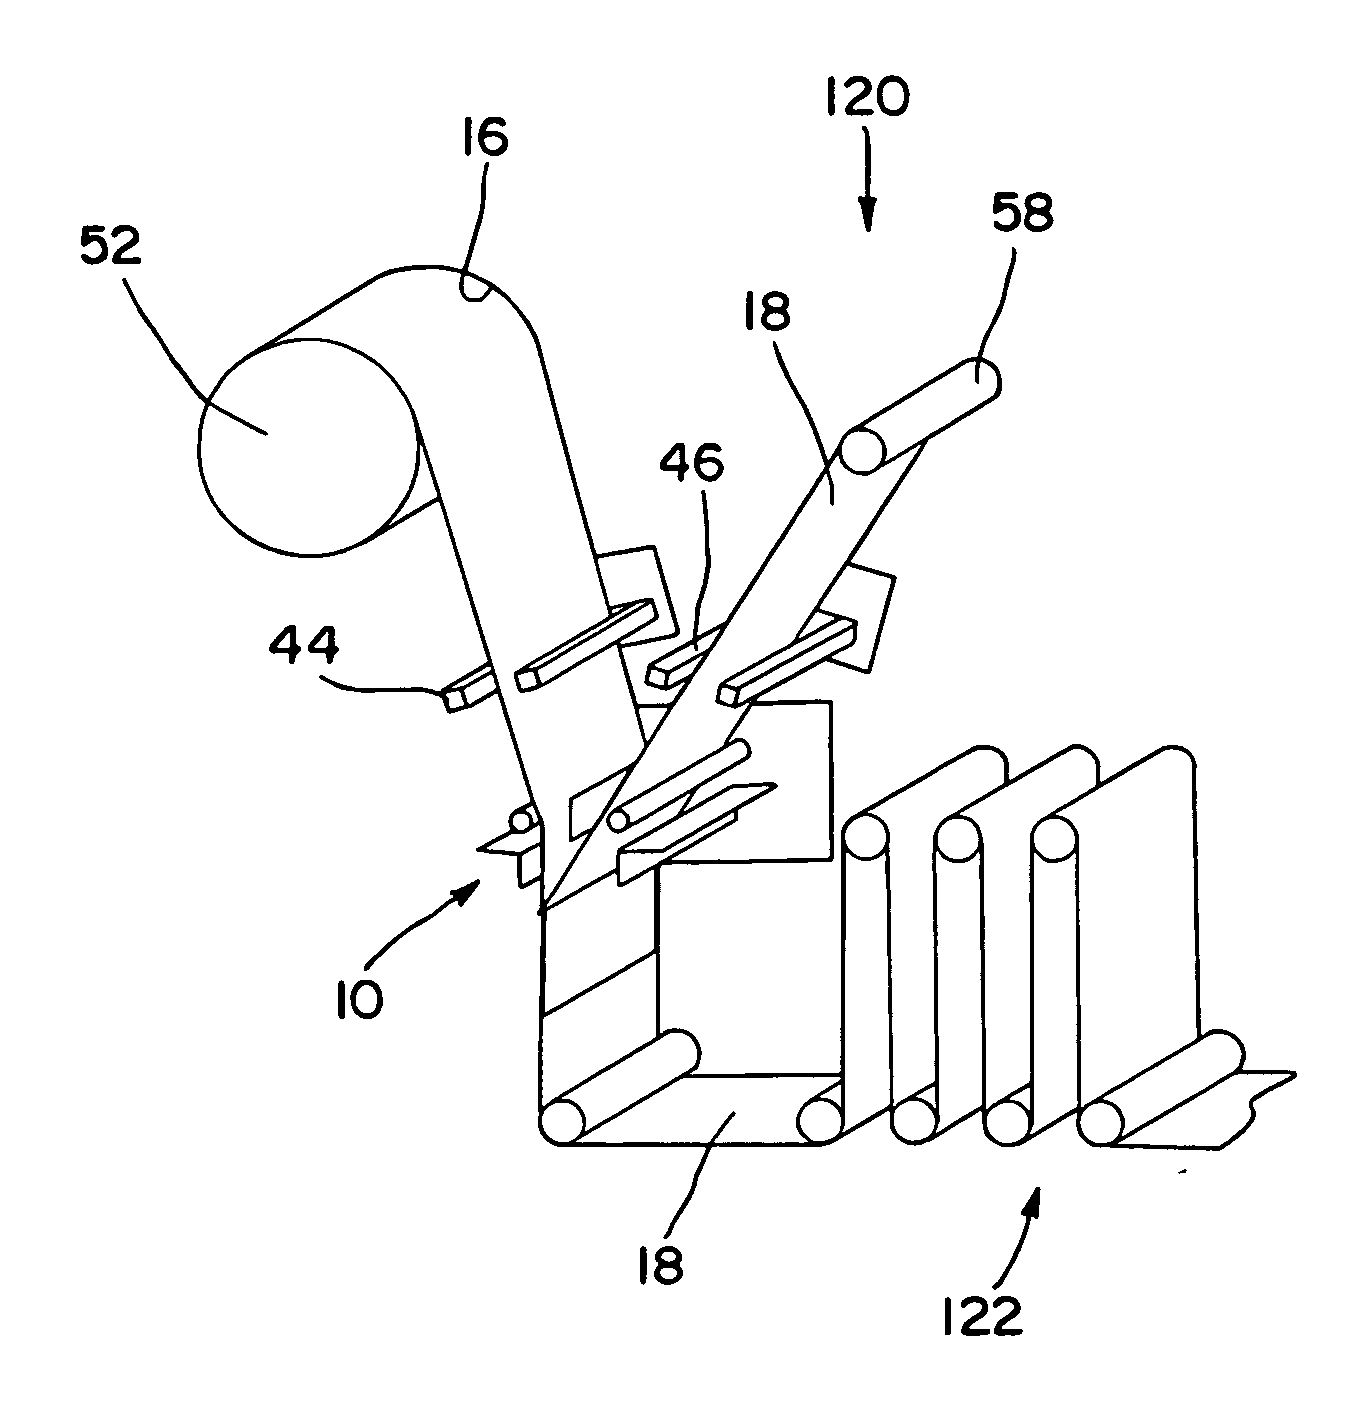 Apparatus and process for aligning materials during a splice